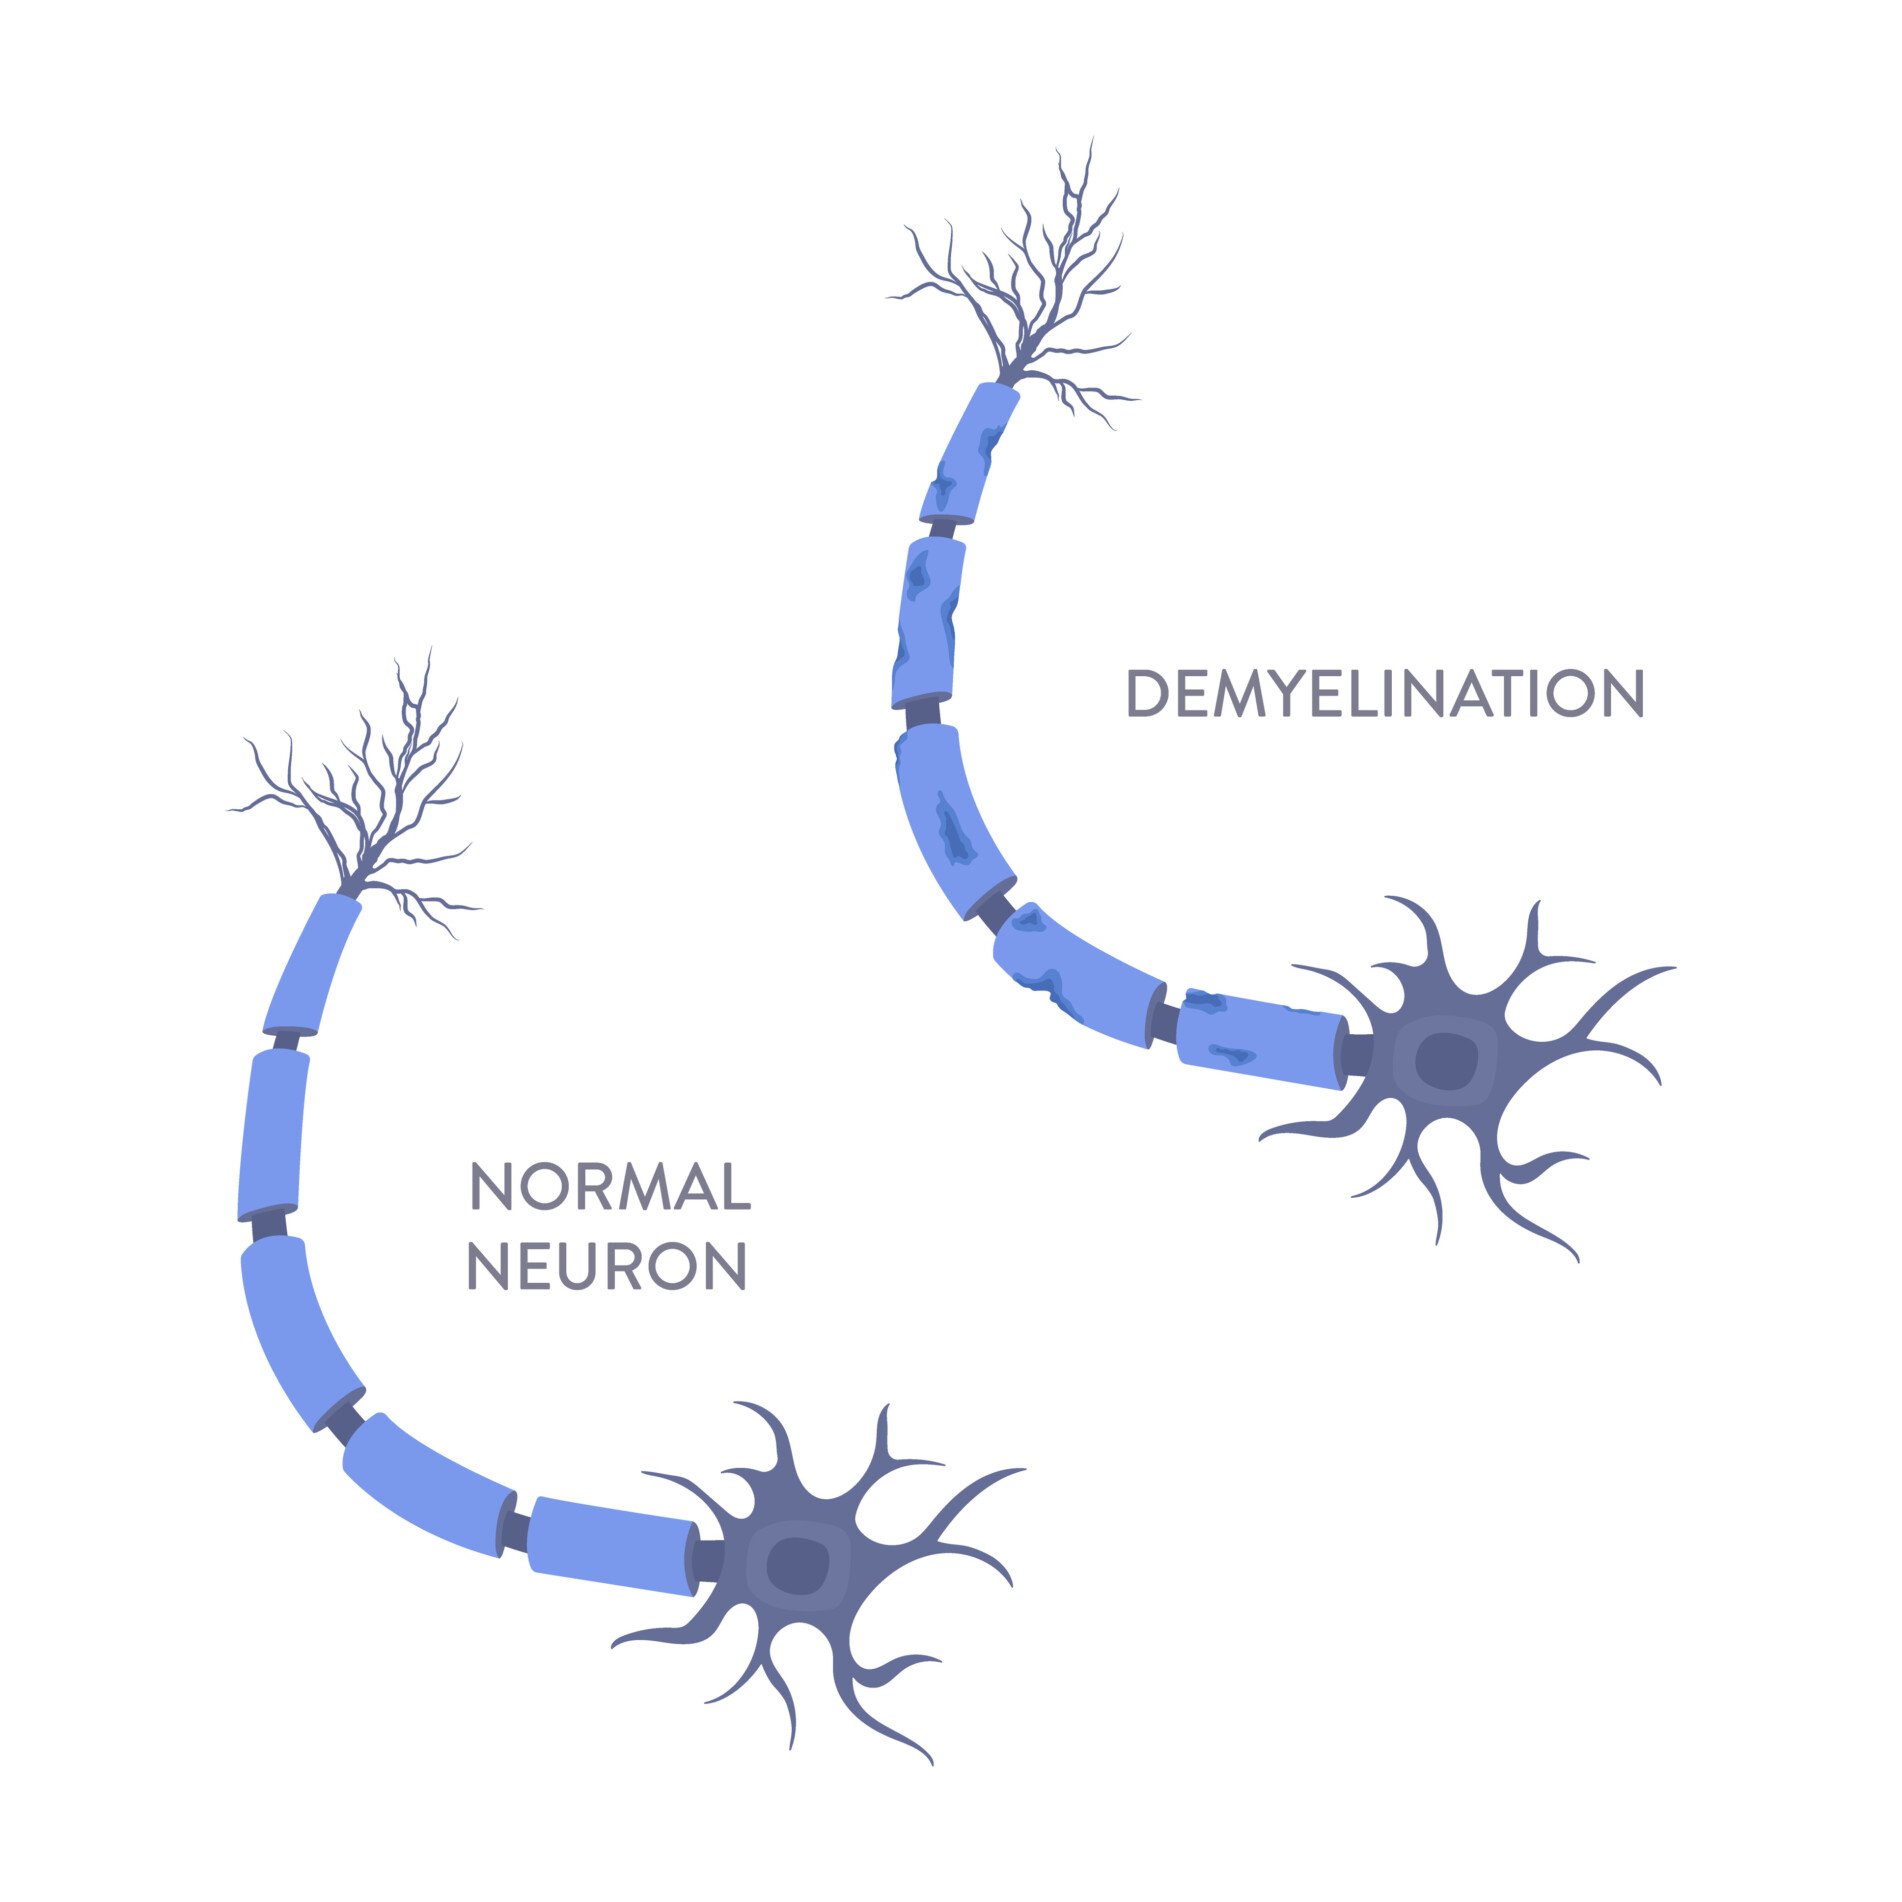 an image of a healthy neuron and one that has demyelination